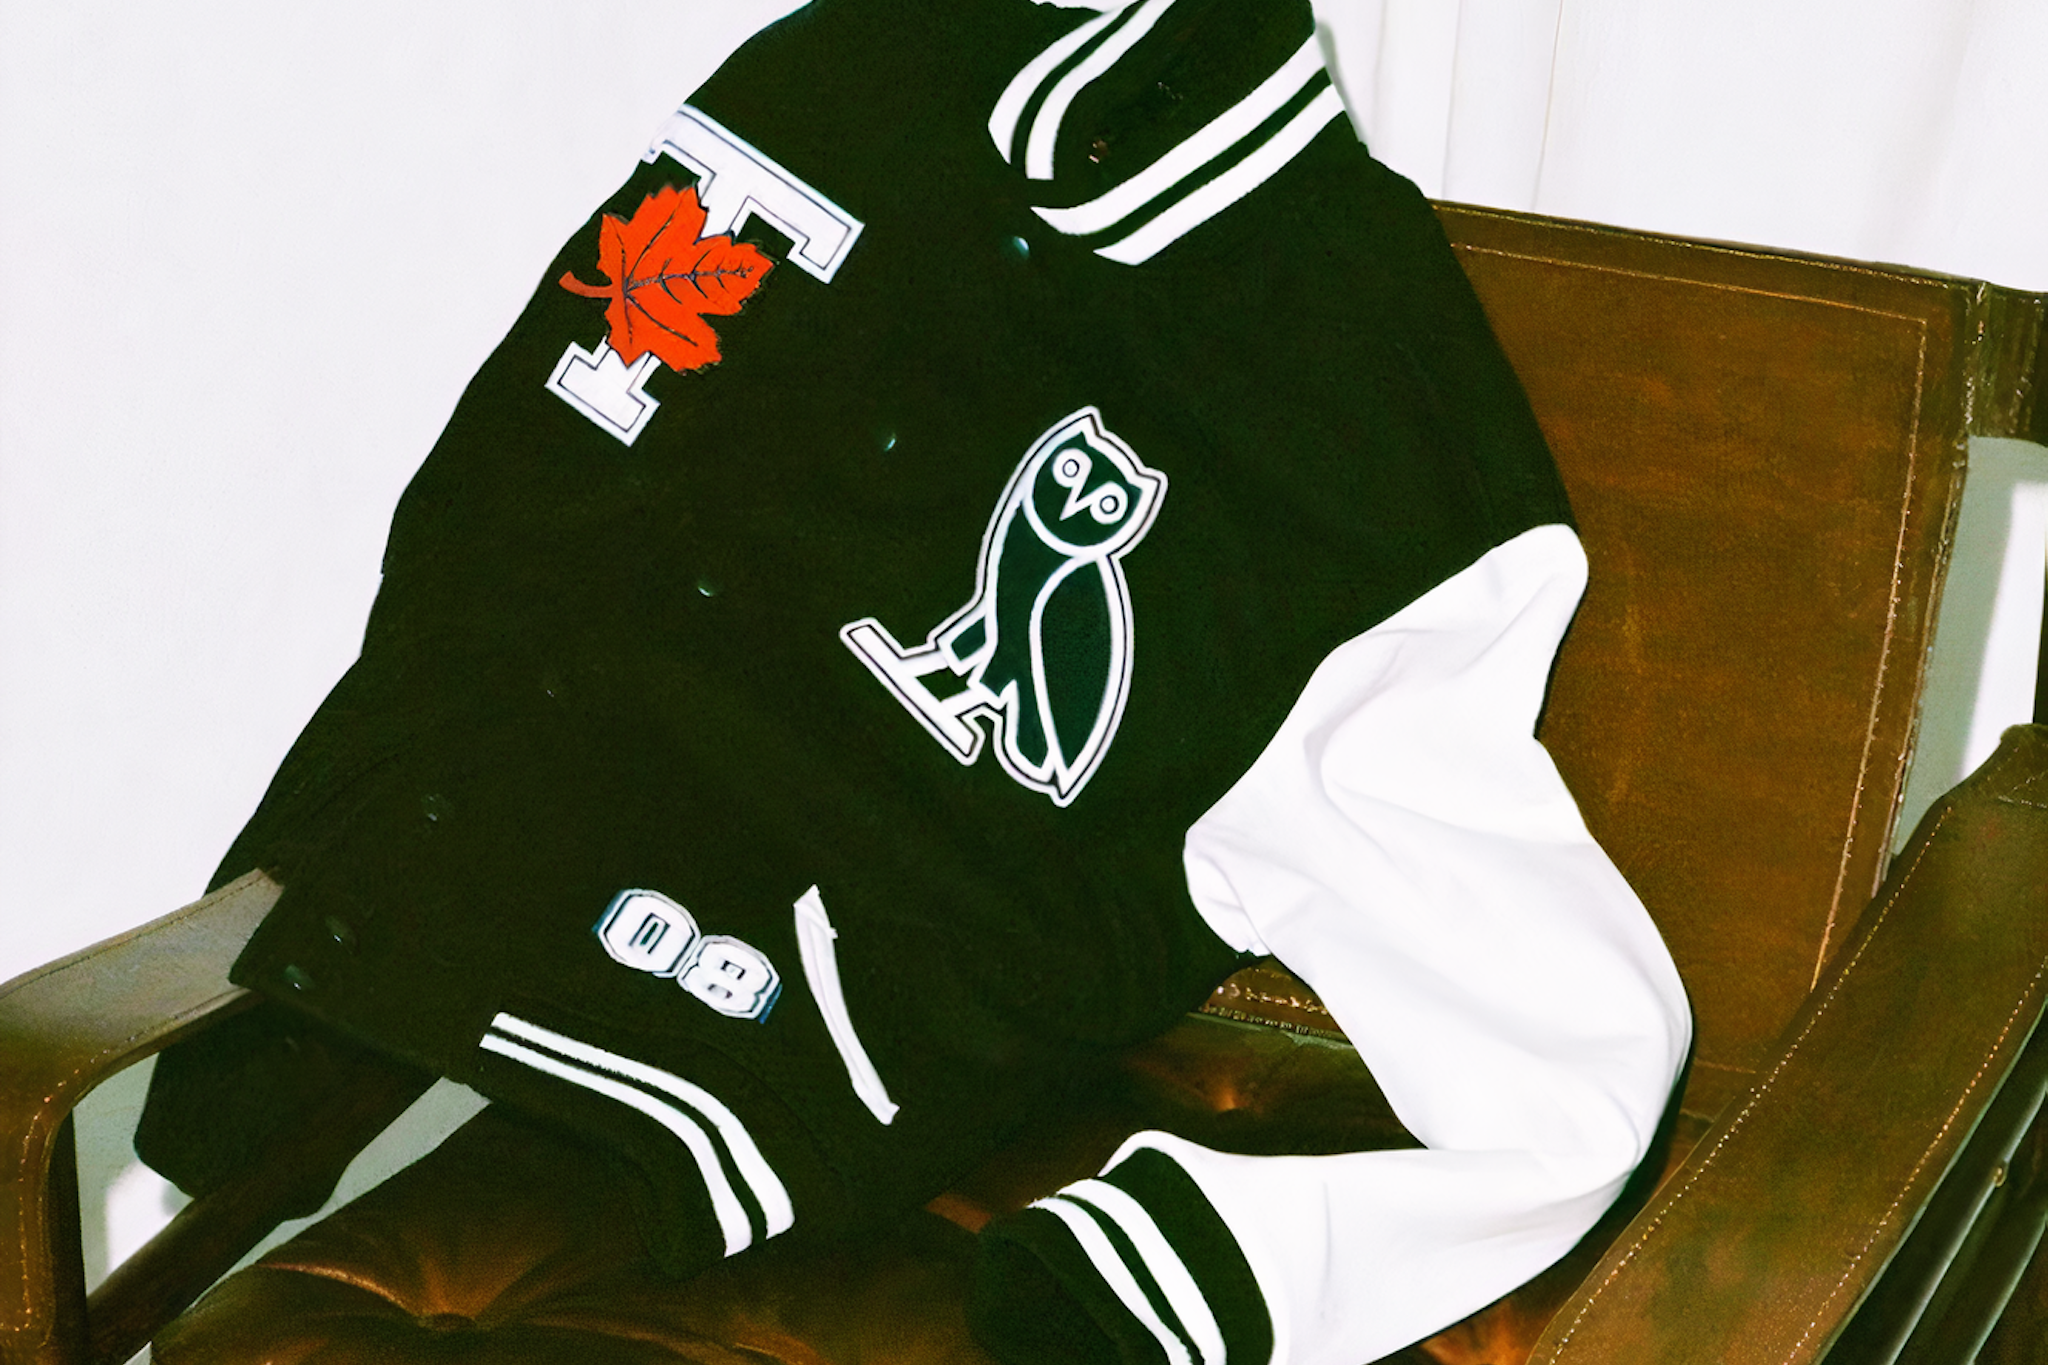 Drake-owned OVO teases upcoming collab with the Leafs